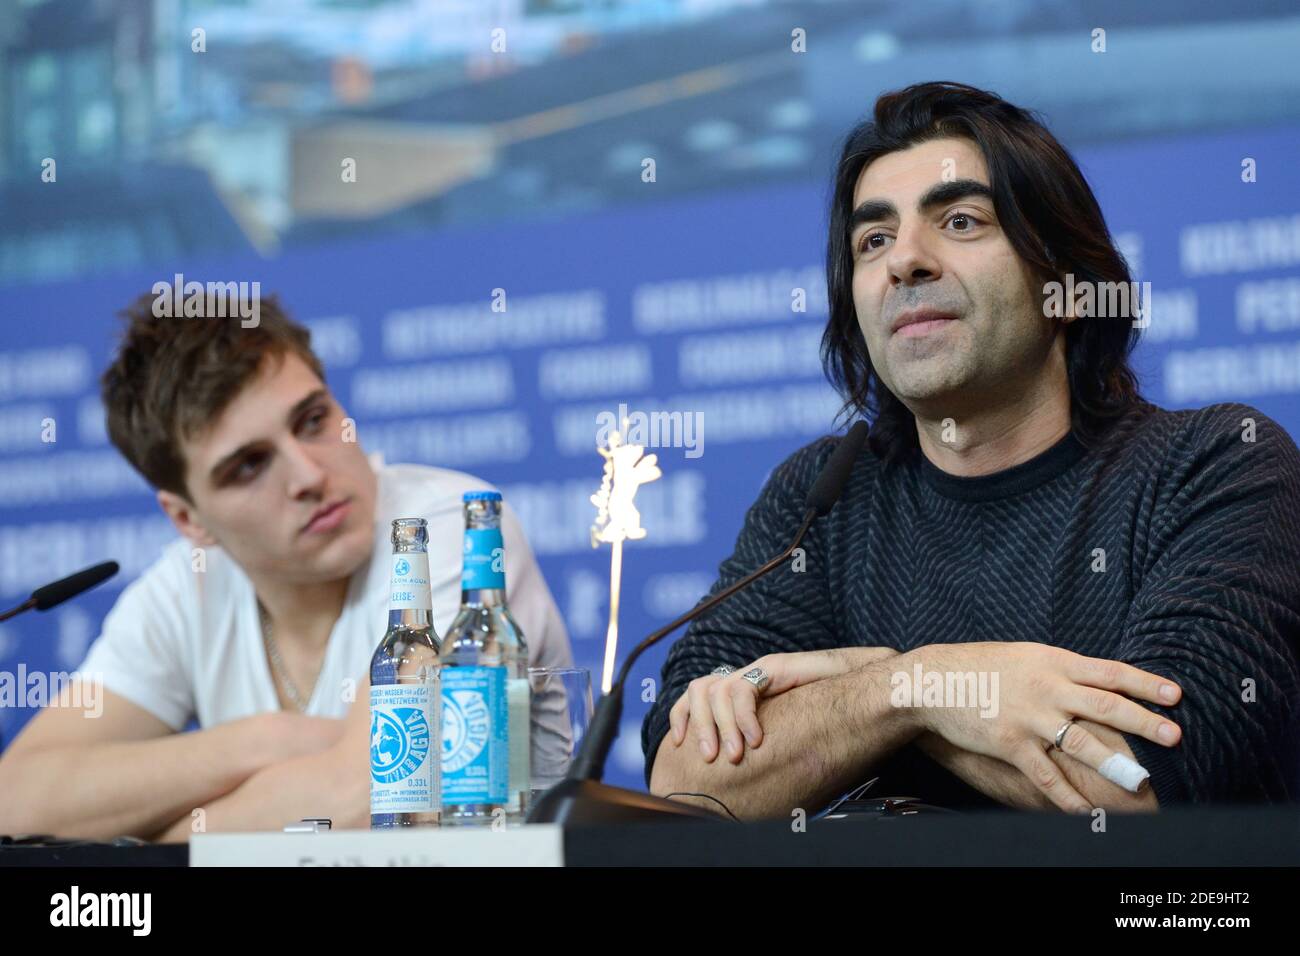 Jonas Dassler and Fatih Akin attending The Golden Glove Press Conference as part of the 69th Berlin International Film Festival (Berlinale) in Berlin, Germany on February 09, 2019. Photo by Aurore Marechal/ABACAPRESS.COM Stock Photo